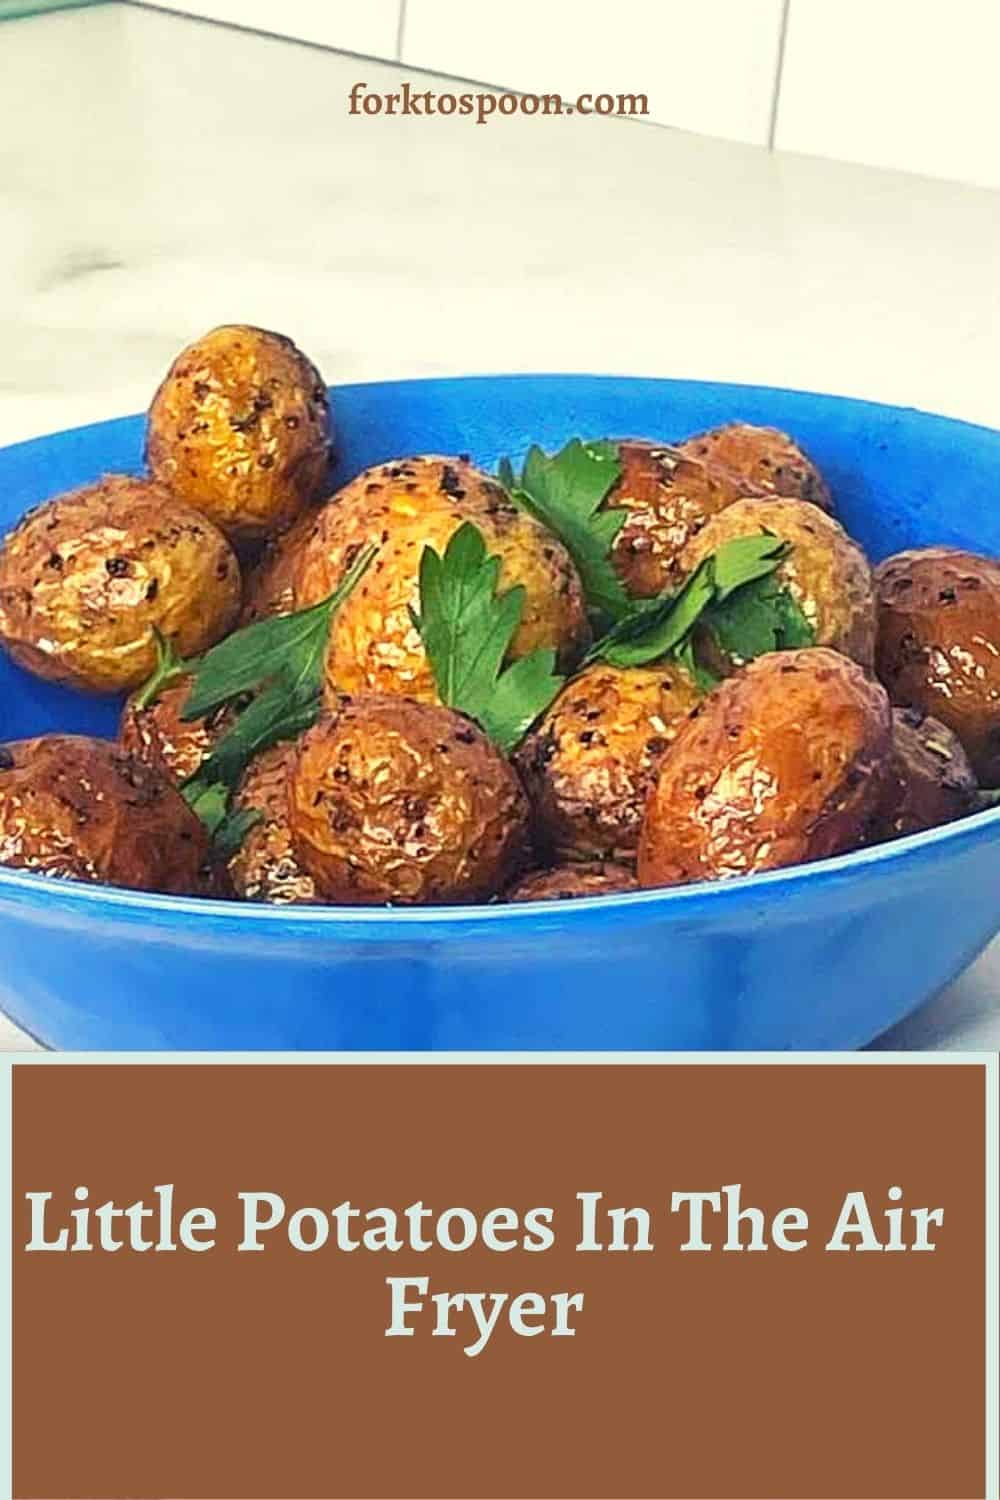 Little Potatoes In The Air Fryer (Little Potato Company) - Fork To Spoon